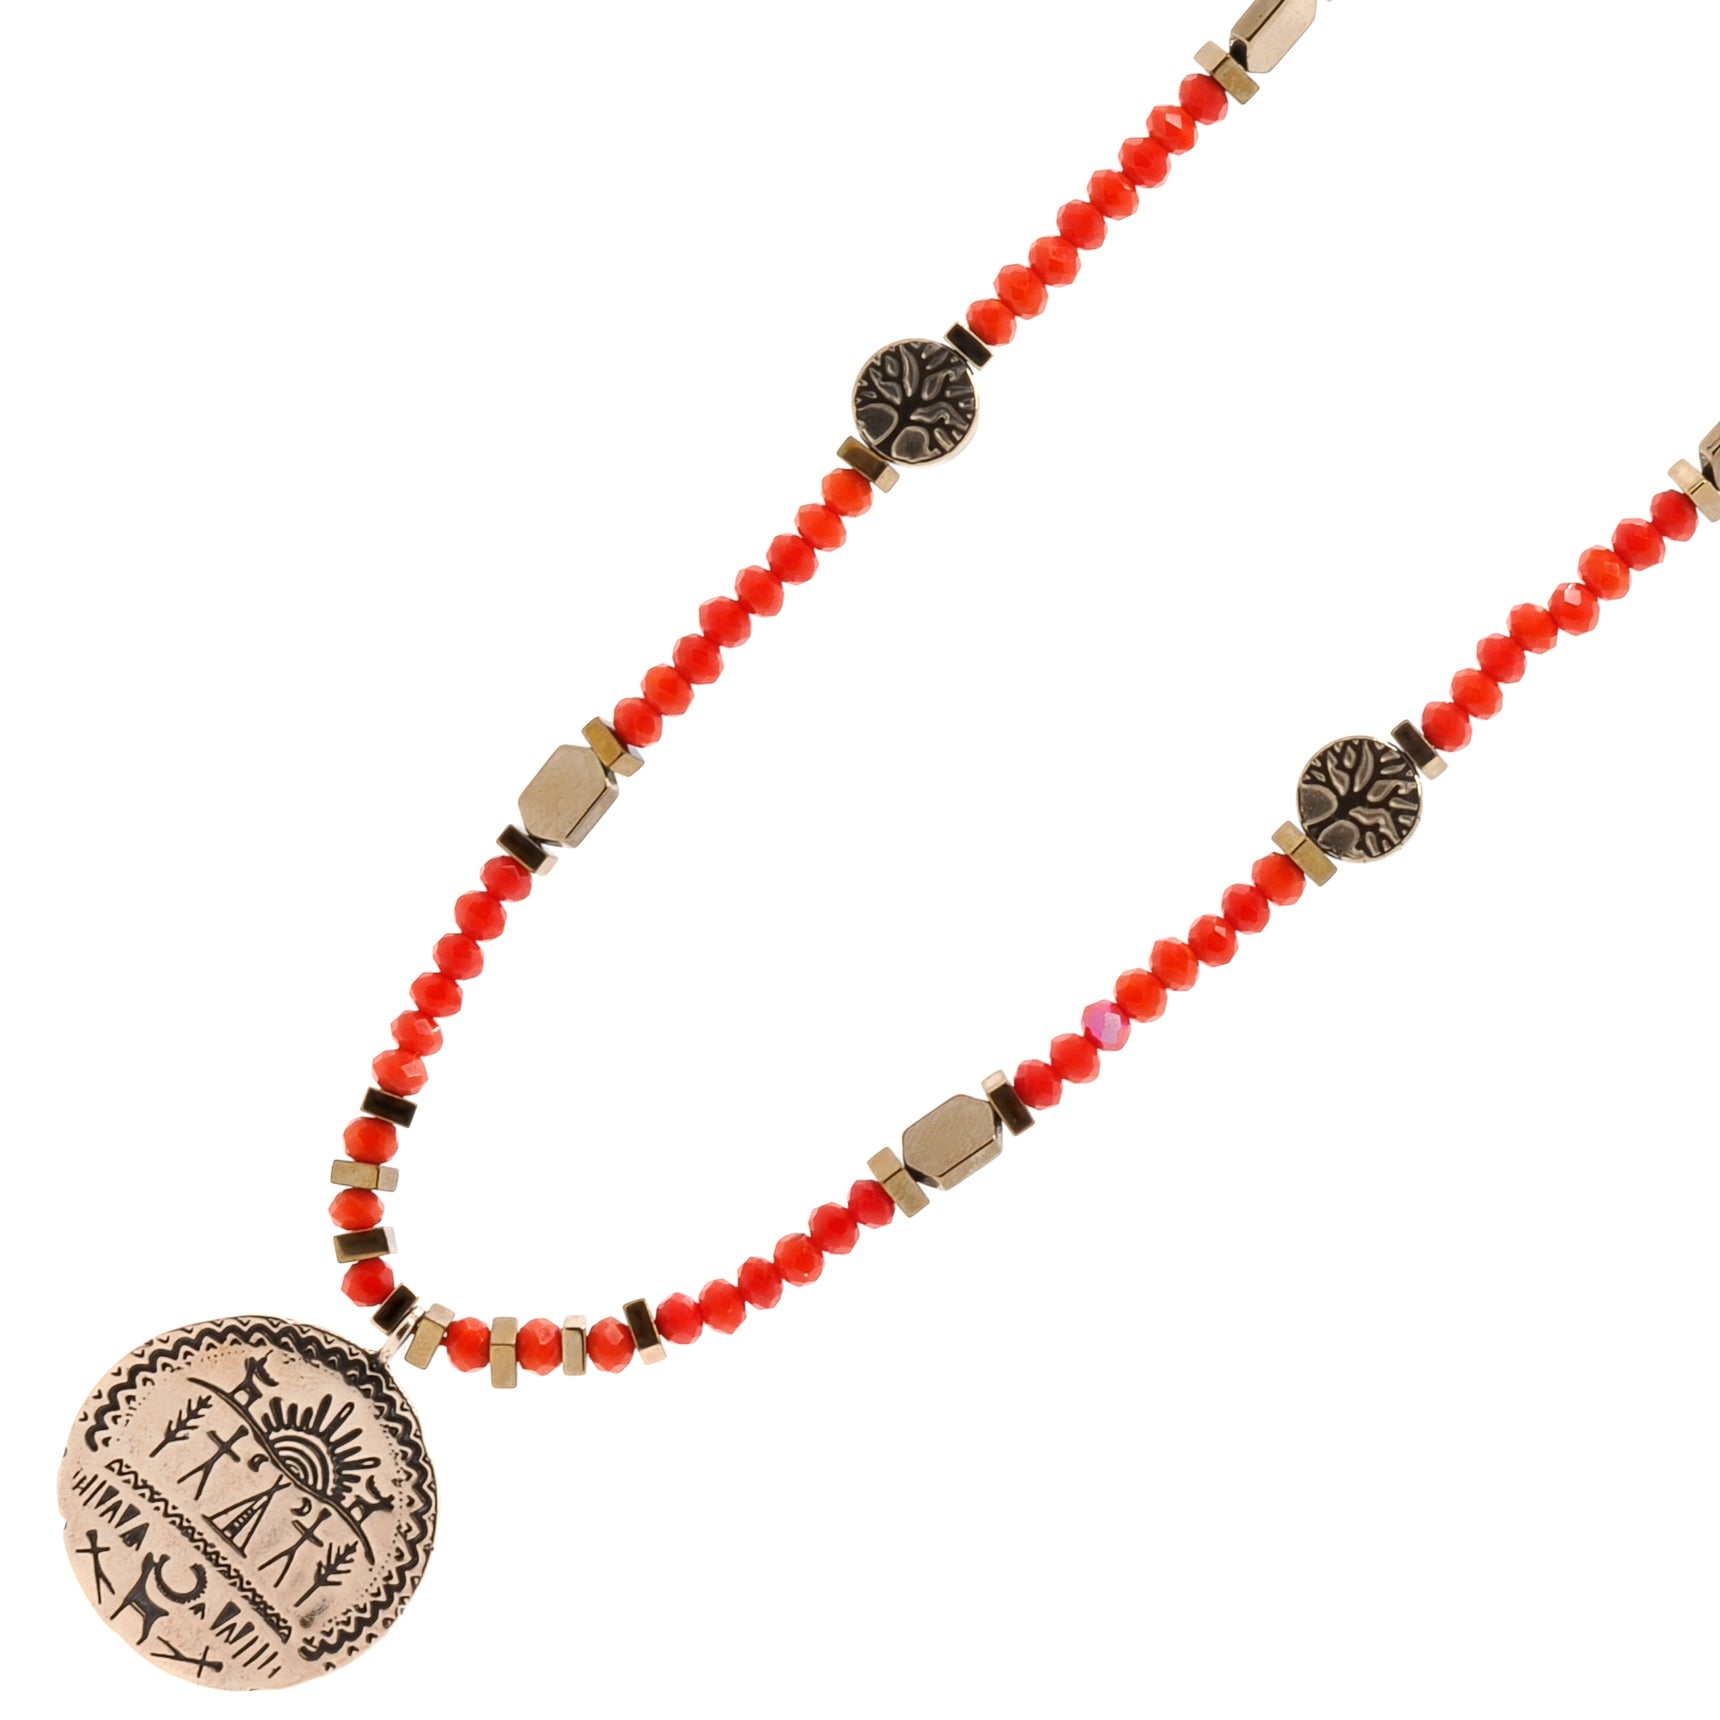 Shamanic Protection Necklace with Orange Crystal Beads - Feel the mystical power flowing through you with this unique talisman.